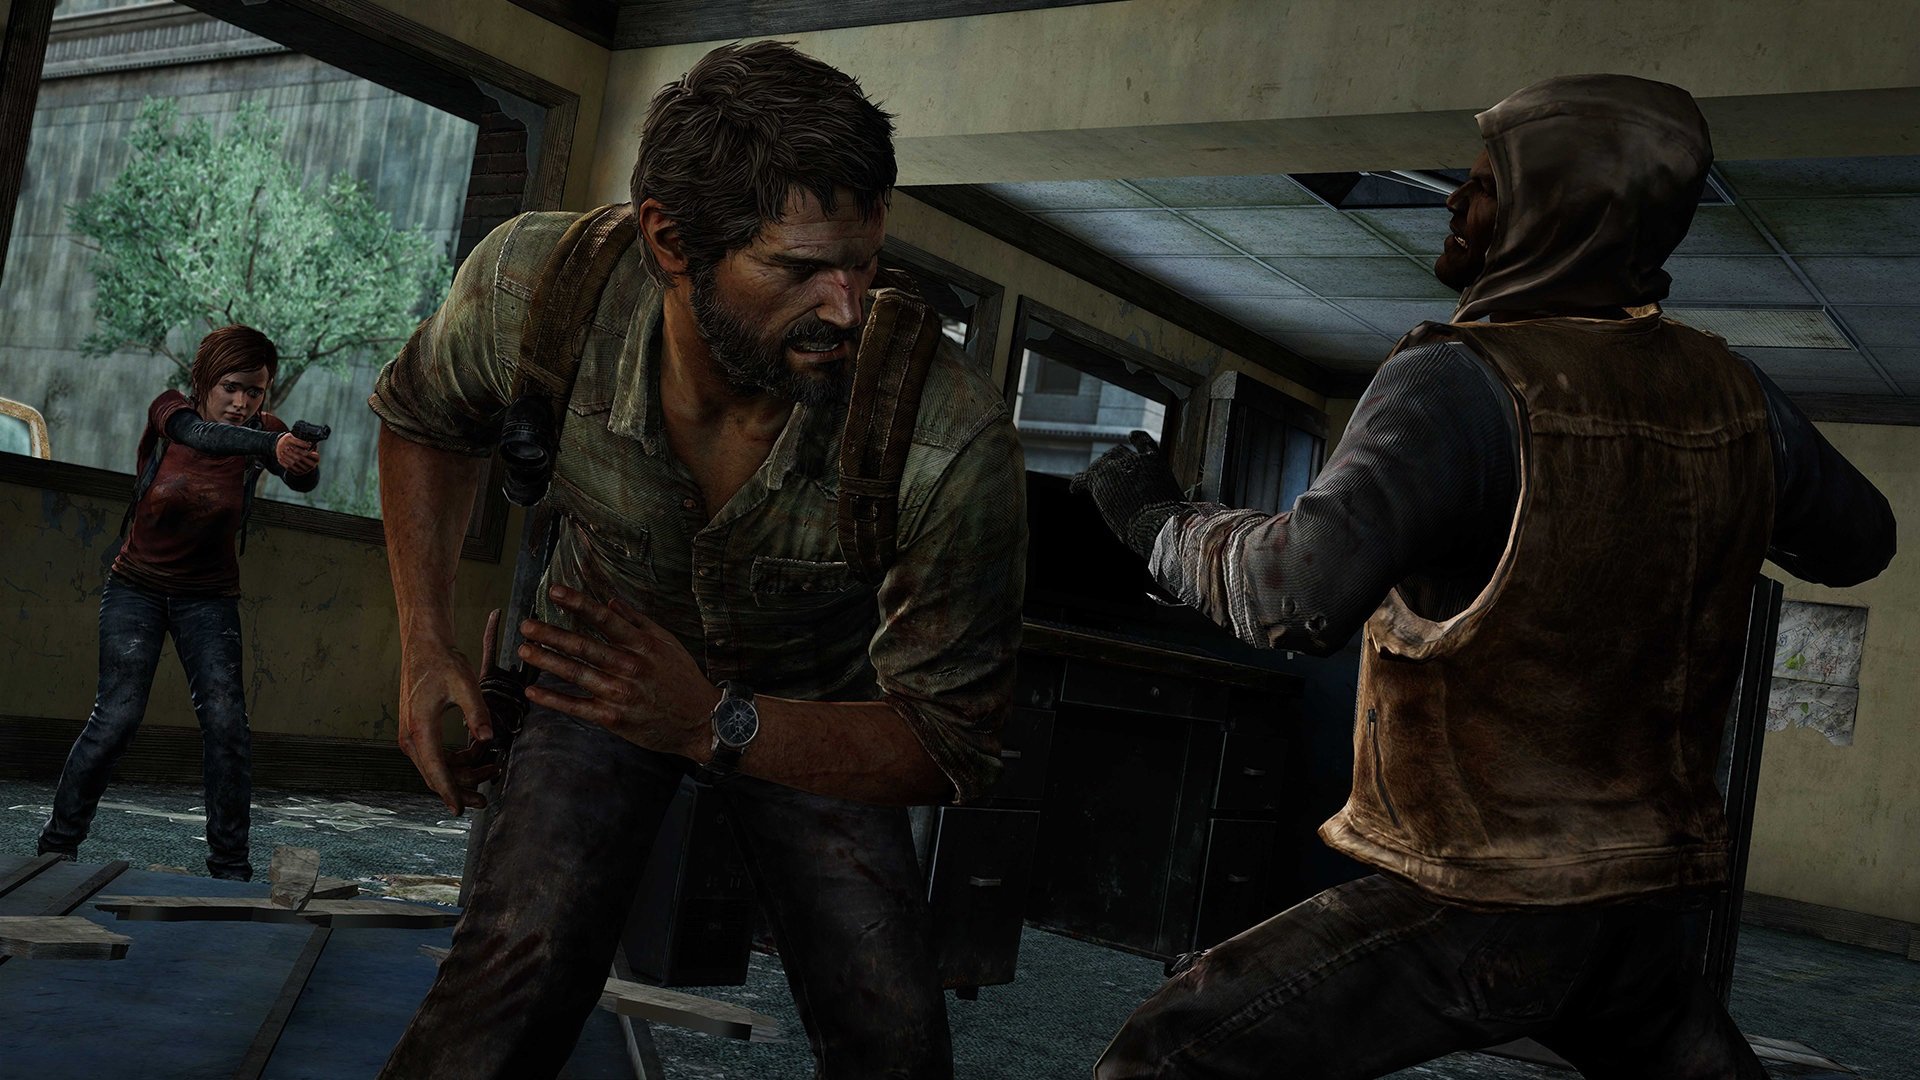 The Last of Us 2: Remastered seemingly confirmed by Naughty Dog dev